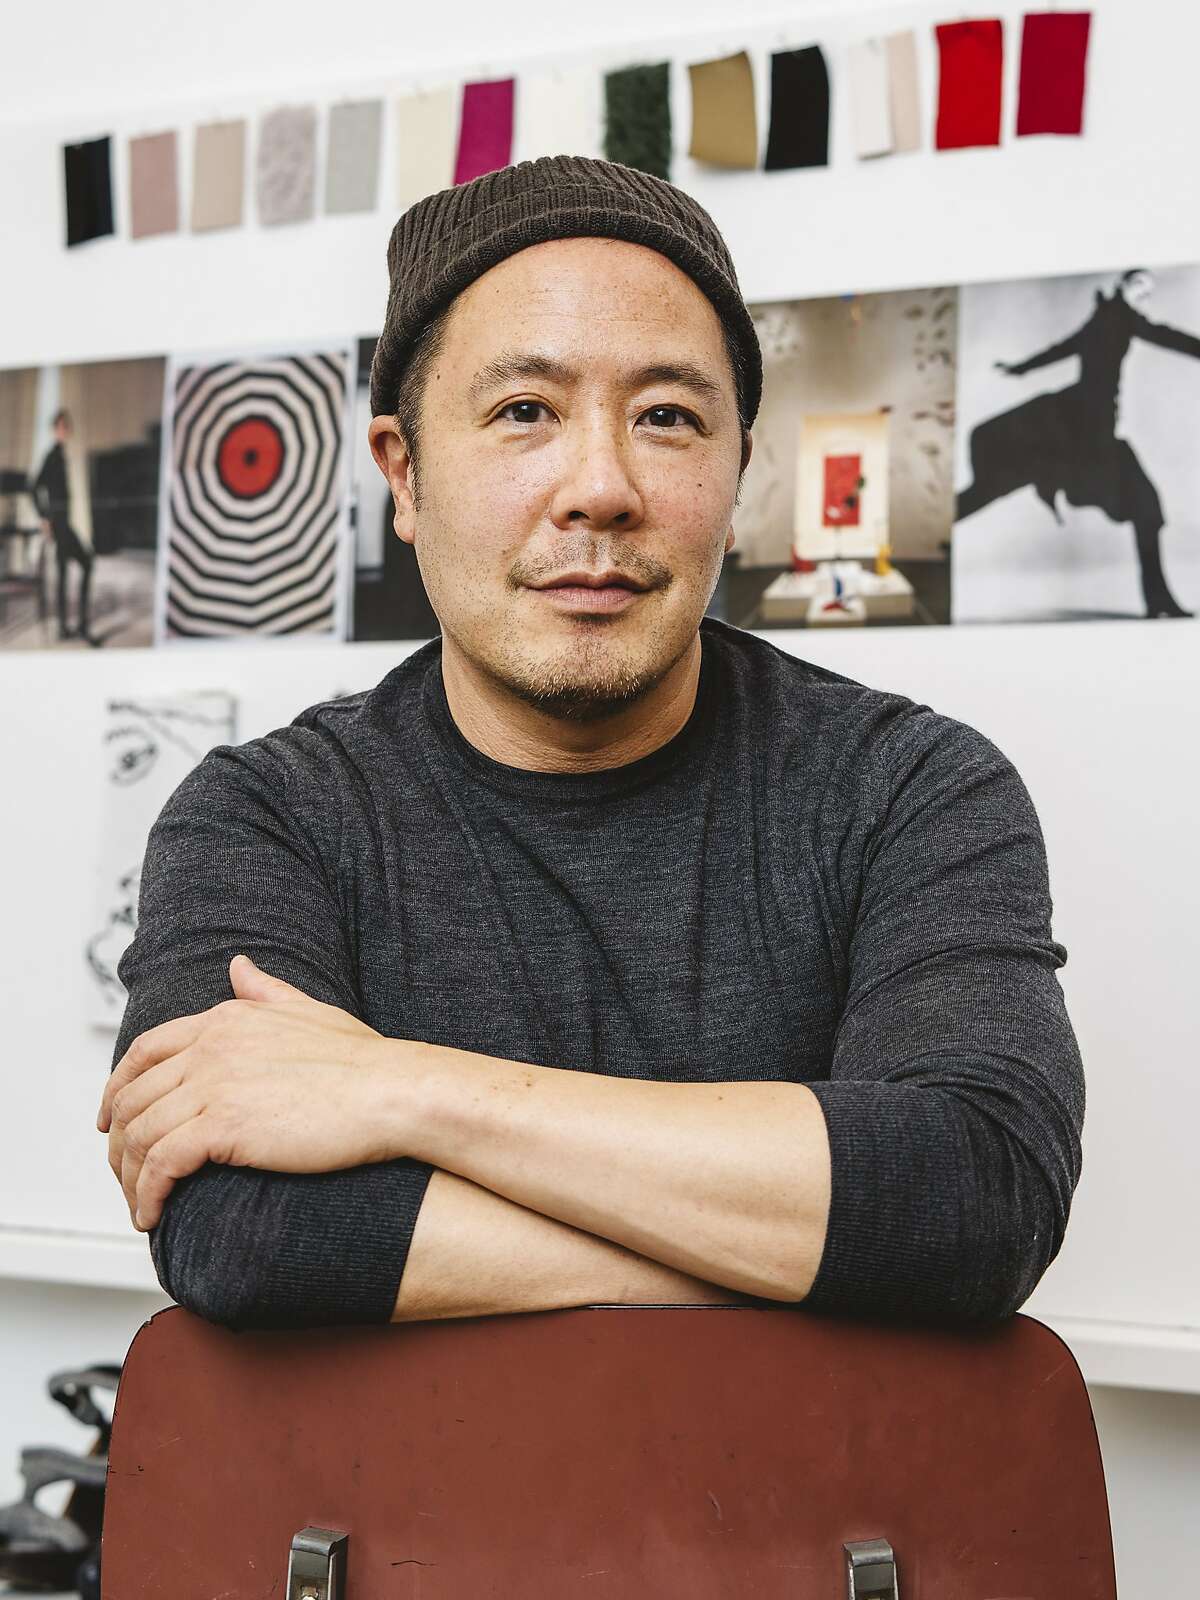 February 15, 2016: New York City, NY - Derek Lam in his office at the brand's headquarters in New York City.